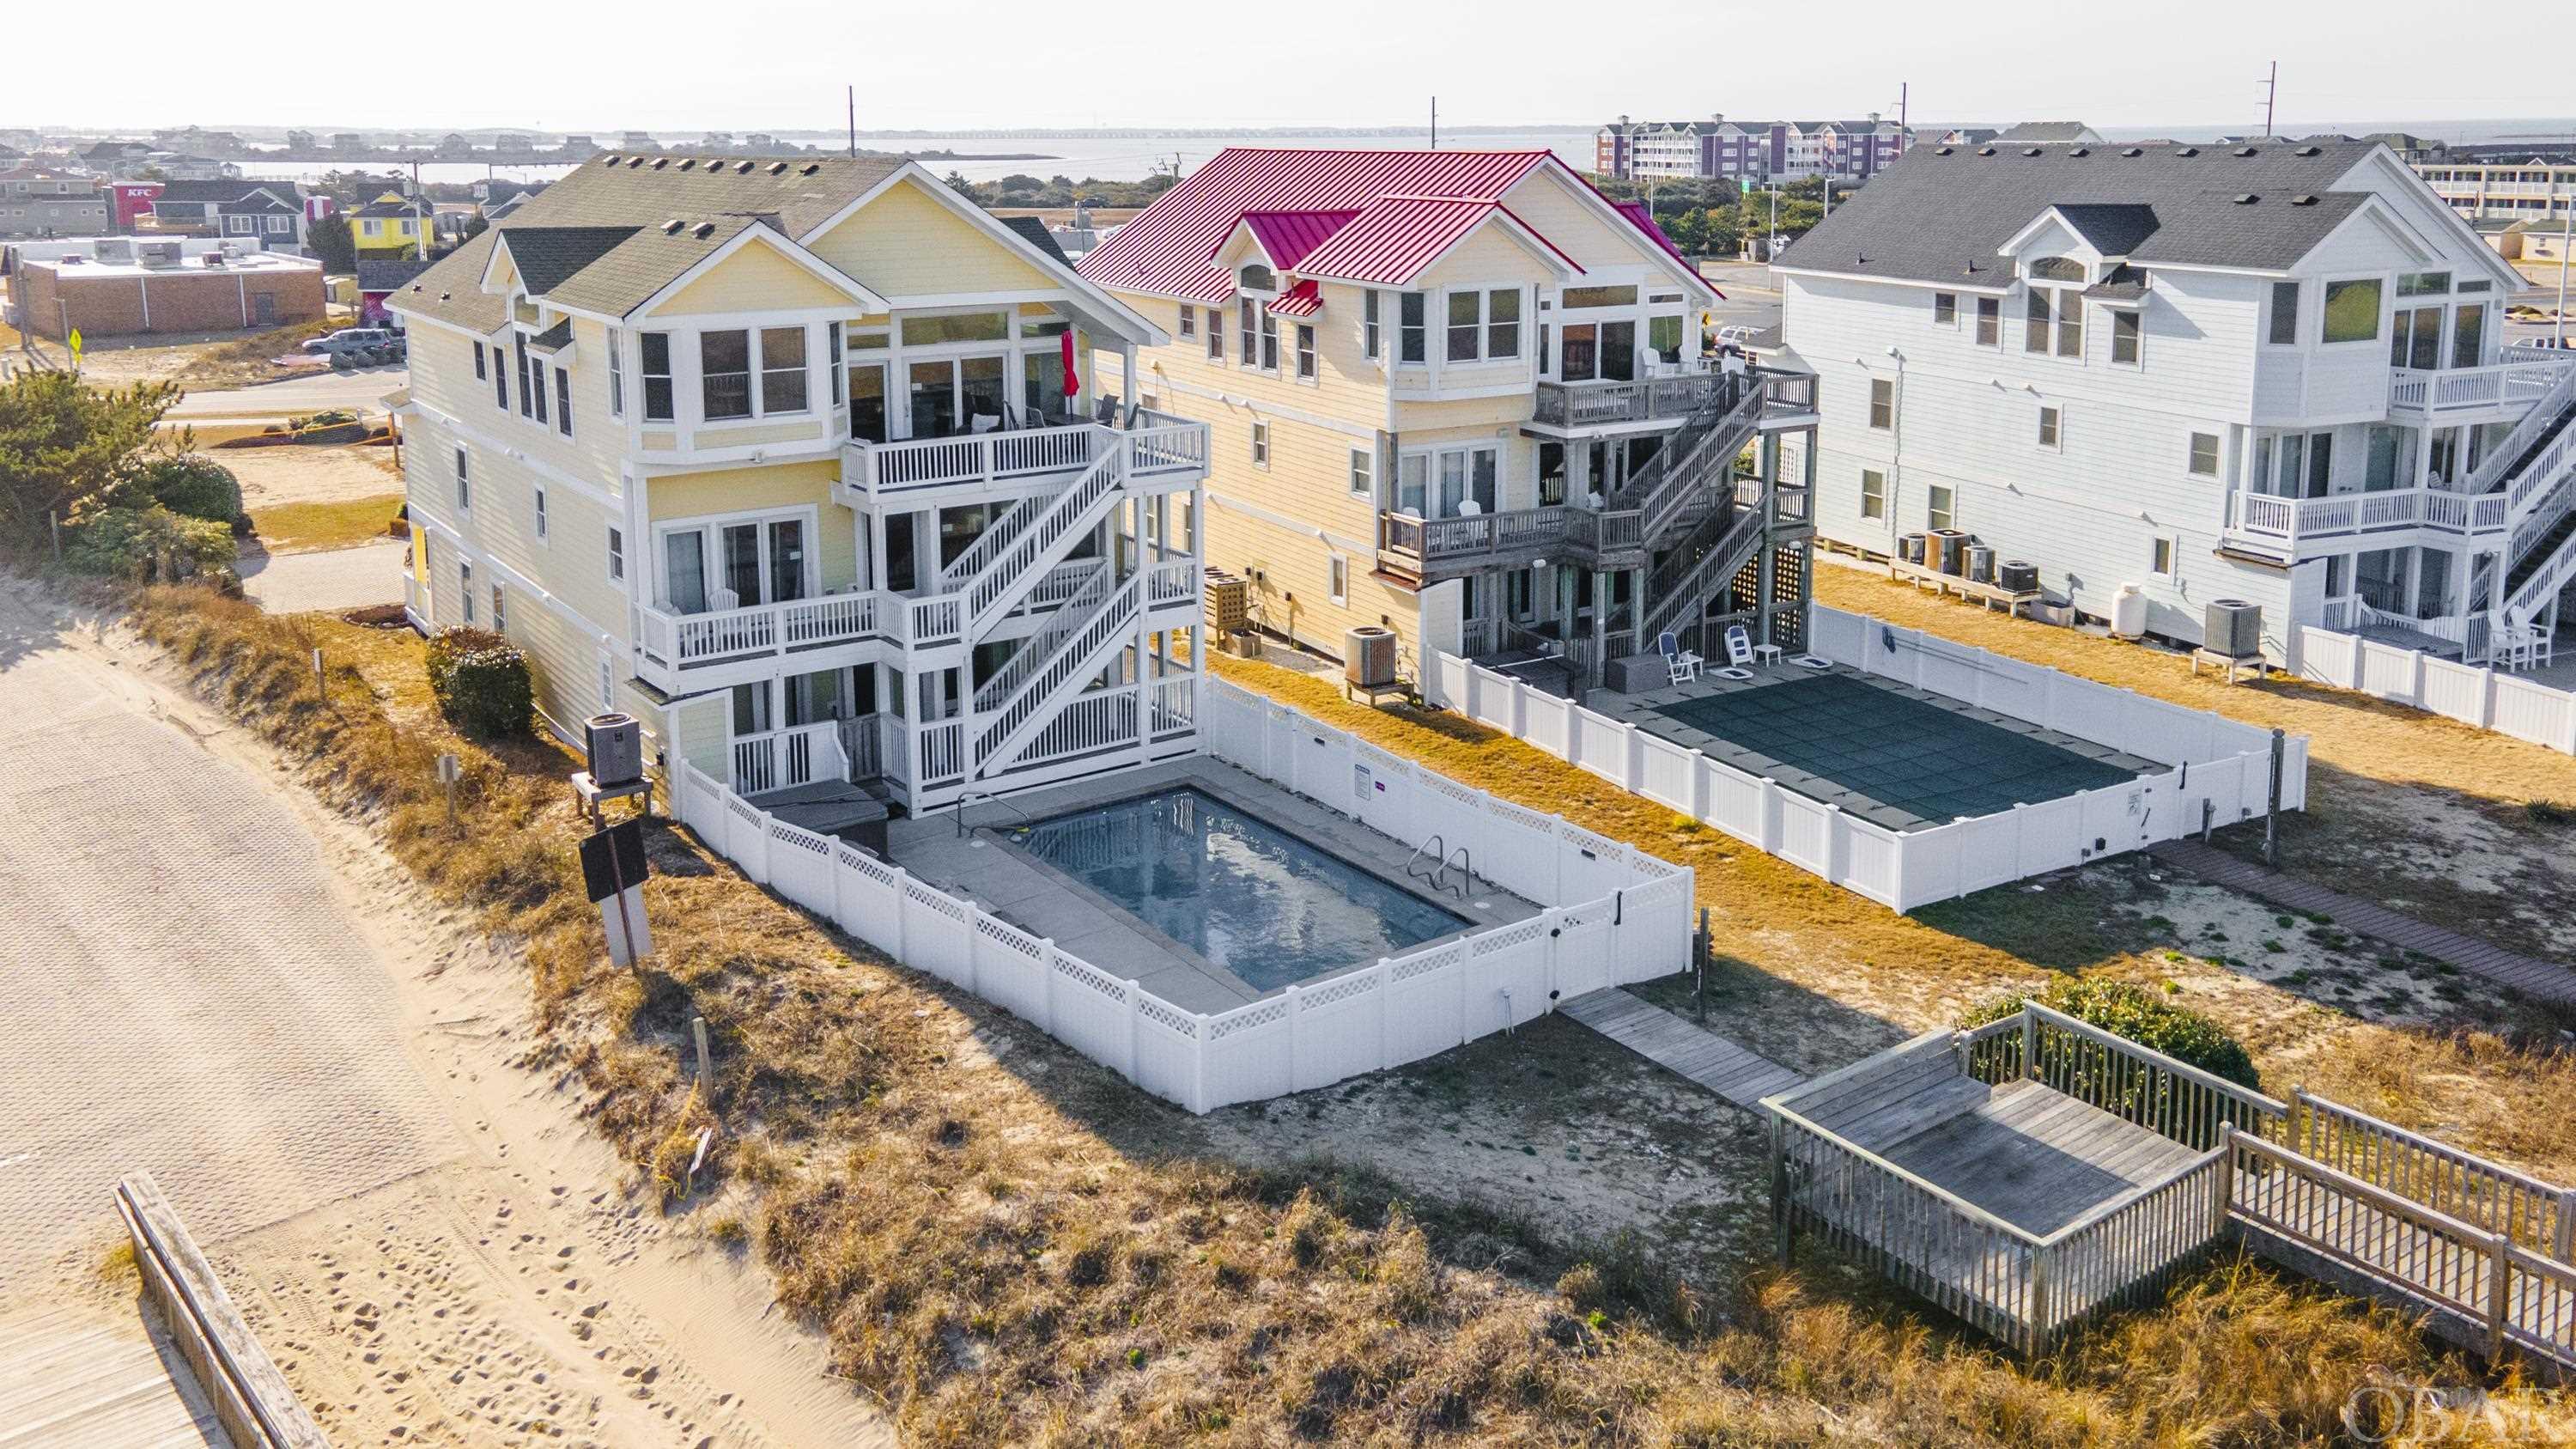 7245 Old Oregon Inlet Road, Nags Head, NC 27959, 8 Bedrooms Bedrooms, ,9 BathroomsBathrooms,Residential,For sale,Old Oregon Inlet Road,124781